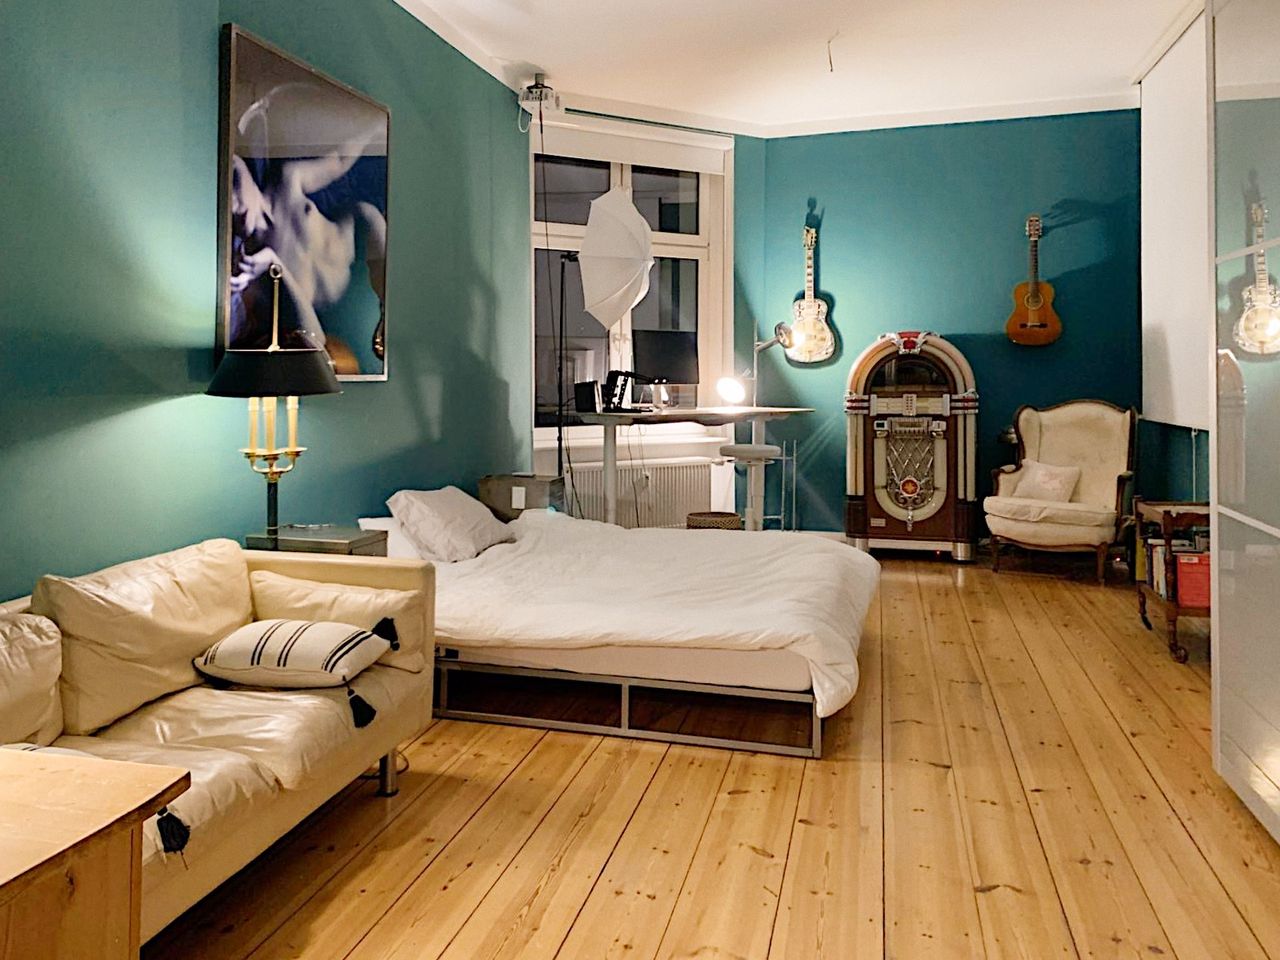 Charming, art-filled home in Prenzlauer Berg. Perfect home office set up!